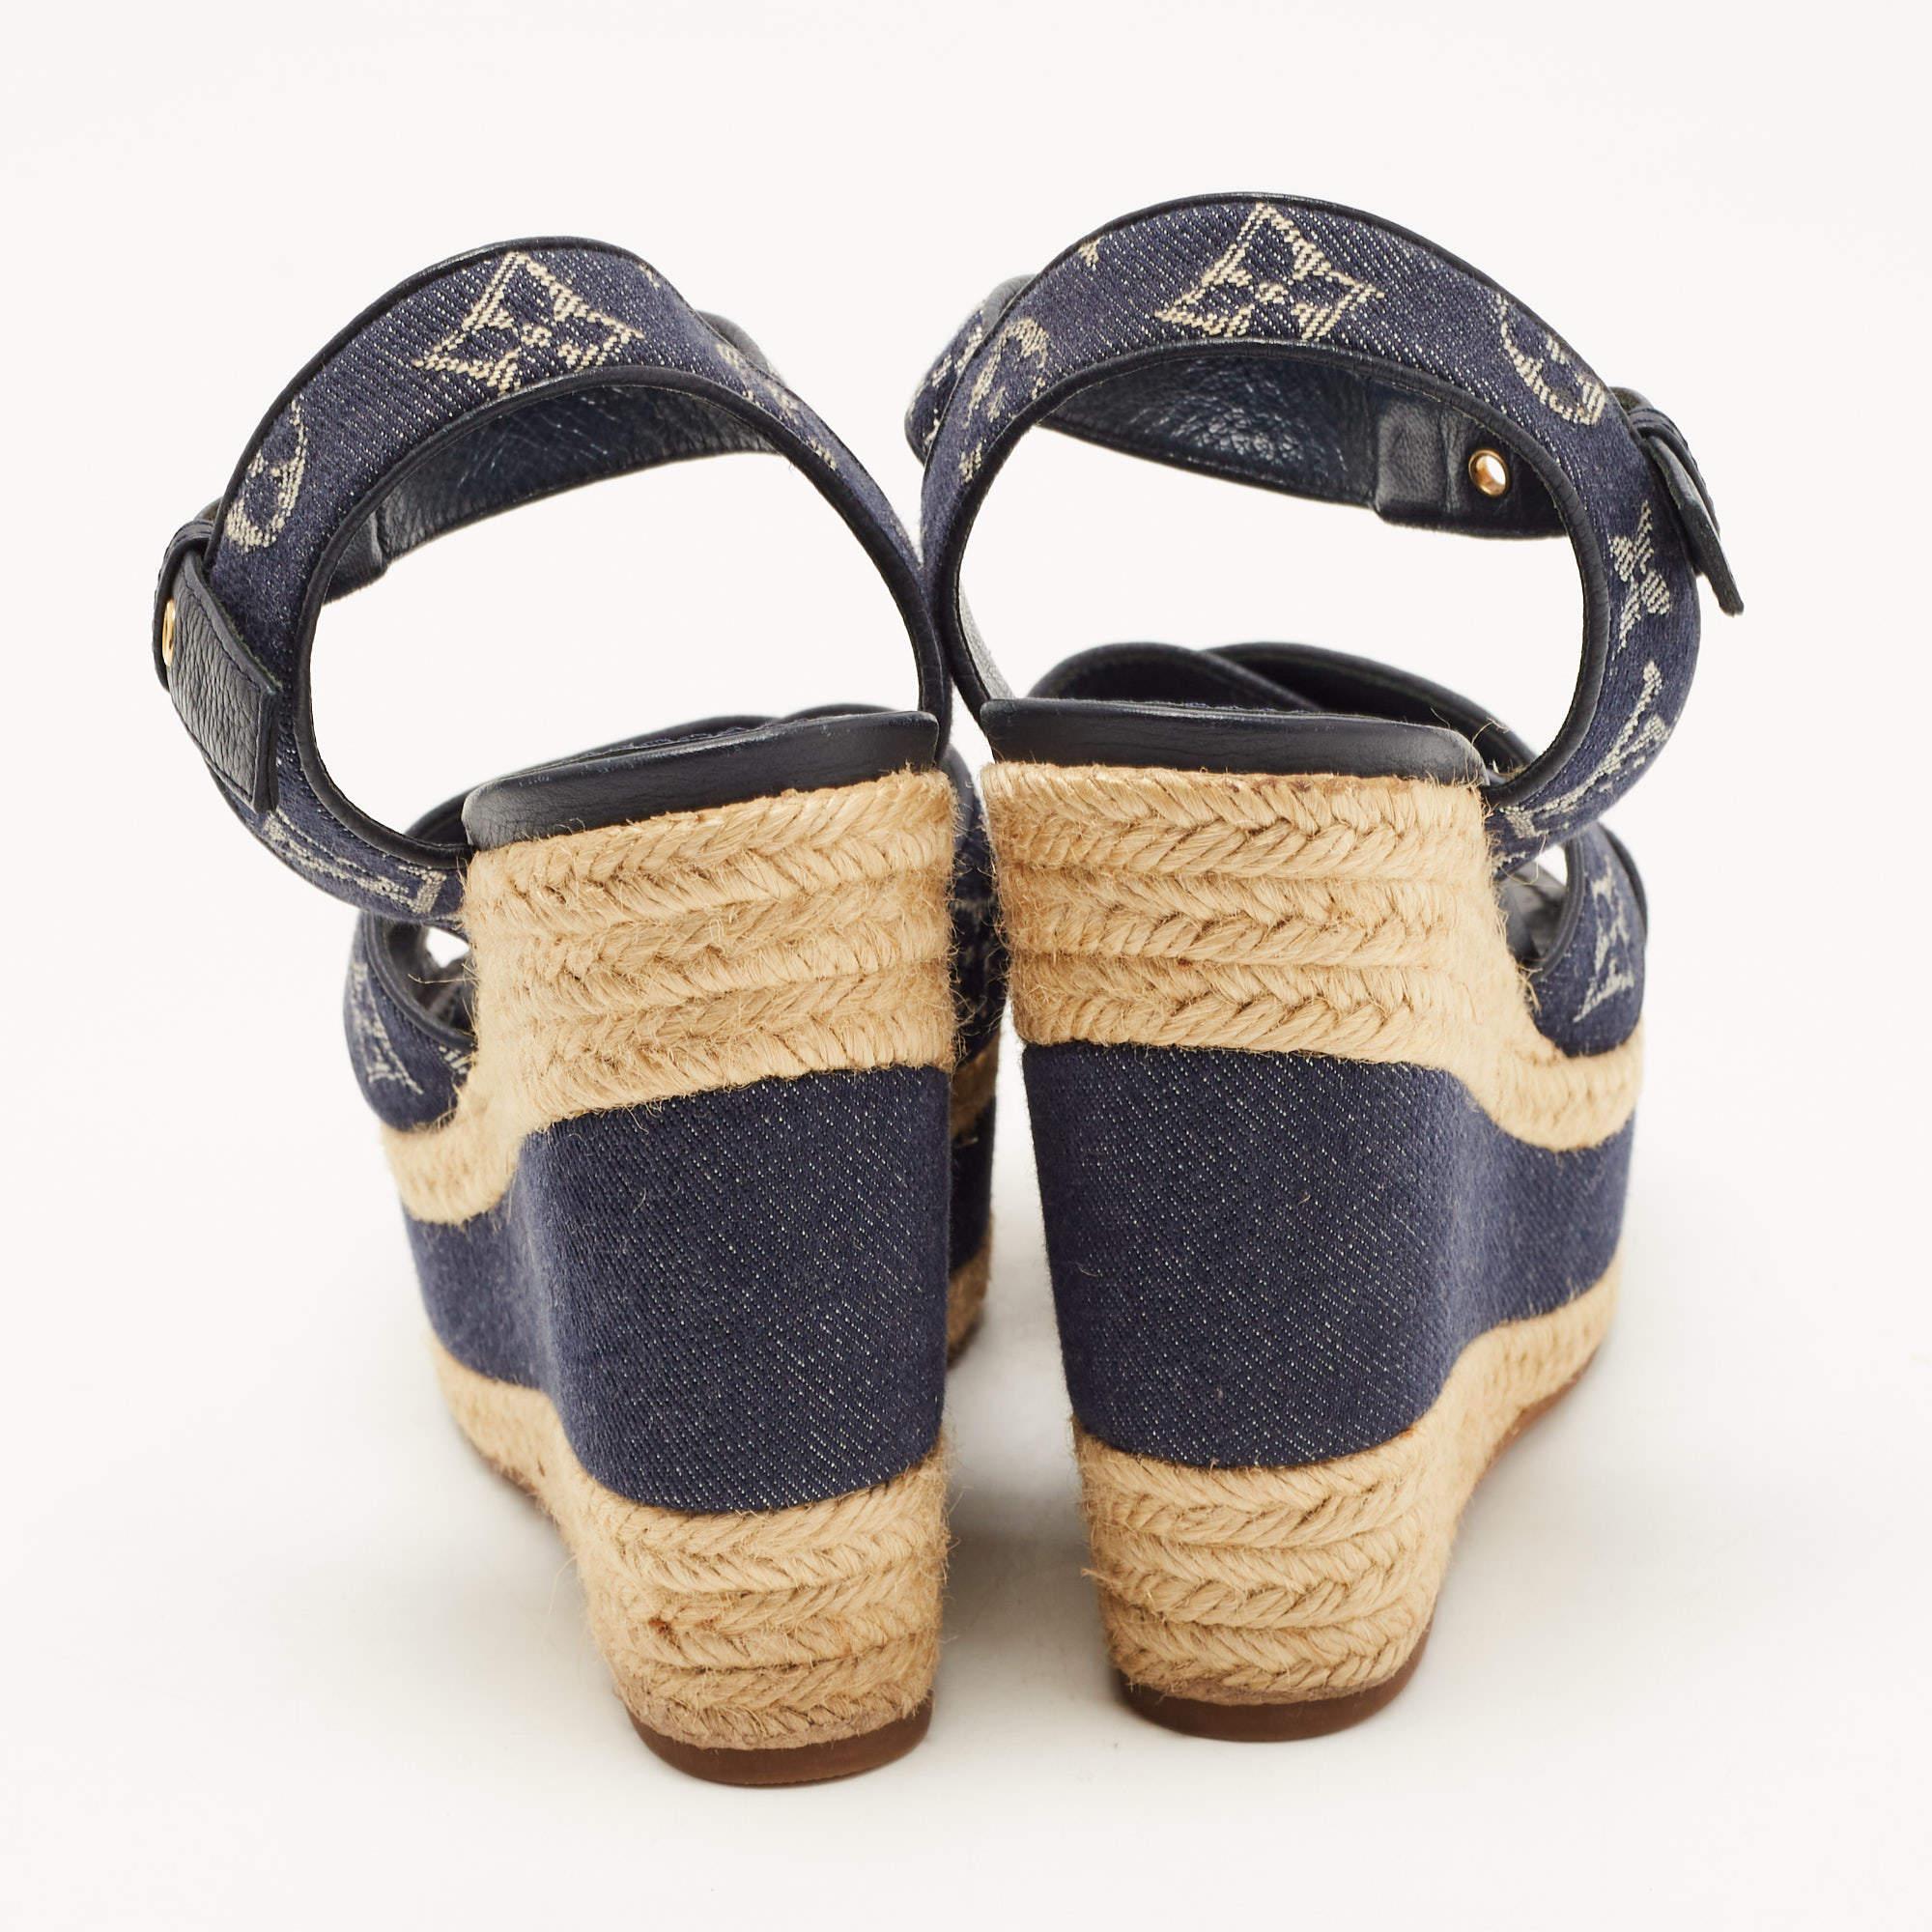 These Louis Vuitton wedge sandals will bring you the perfect amount of style and comfort. They feature denim cross straps on the uppers, leather ankle straps with buckle closure and are set on wedge heels. They are lovely and easy to flaunt.

